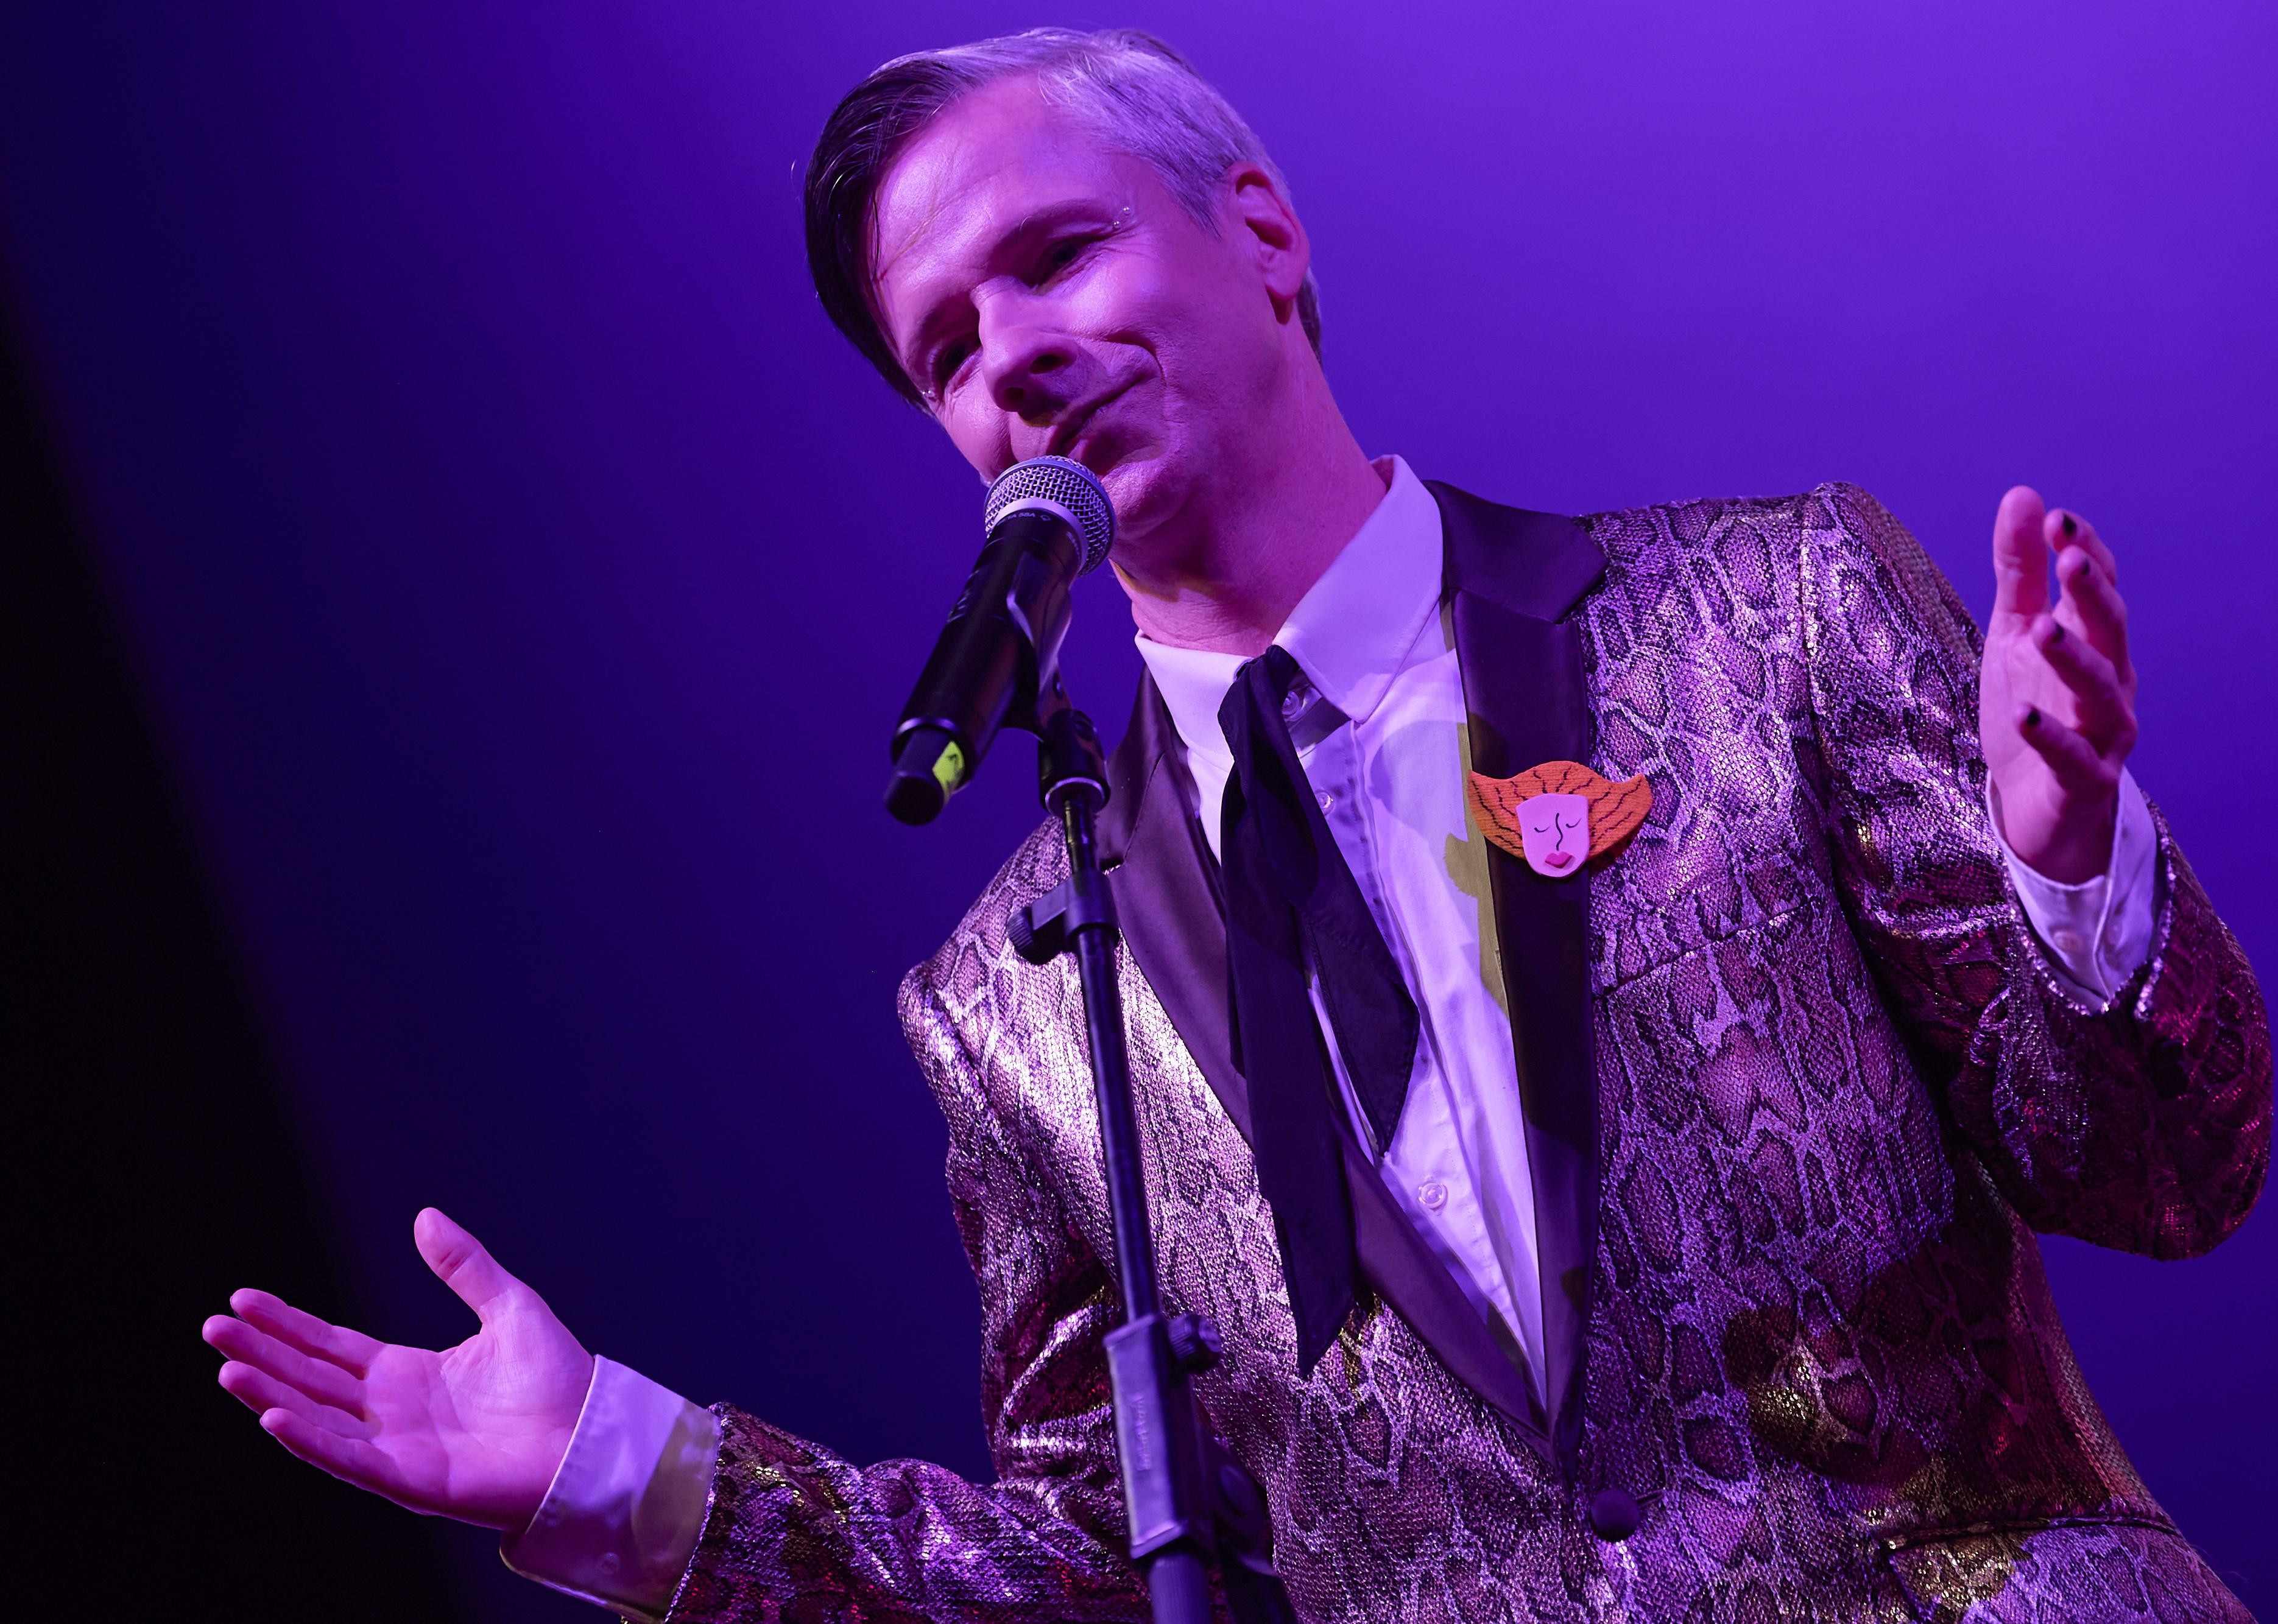 John Cameron Mitchell on stage in Malaga, Spain.